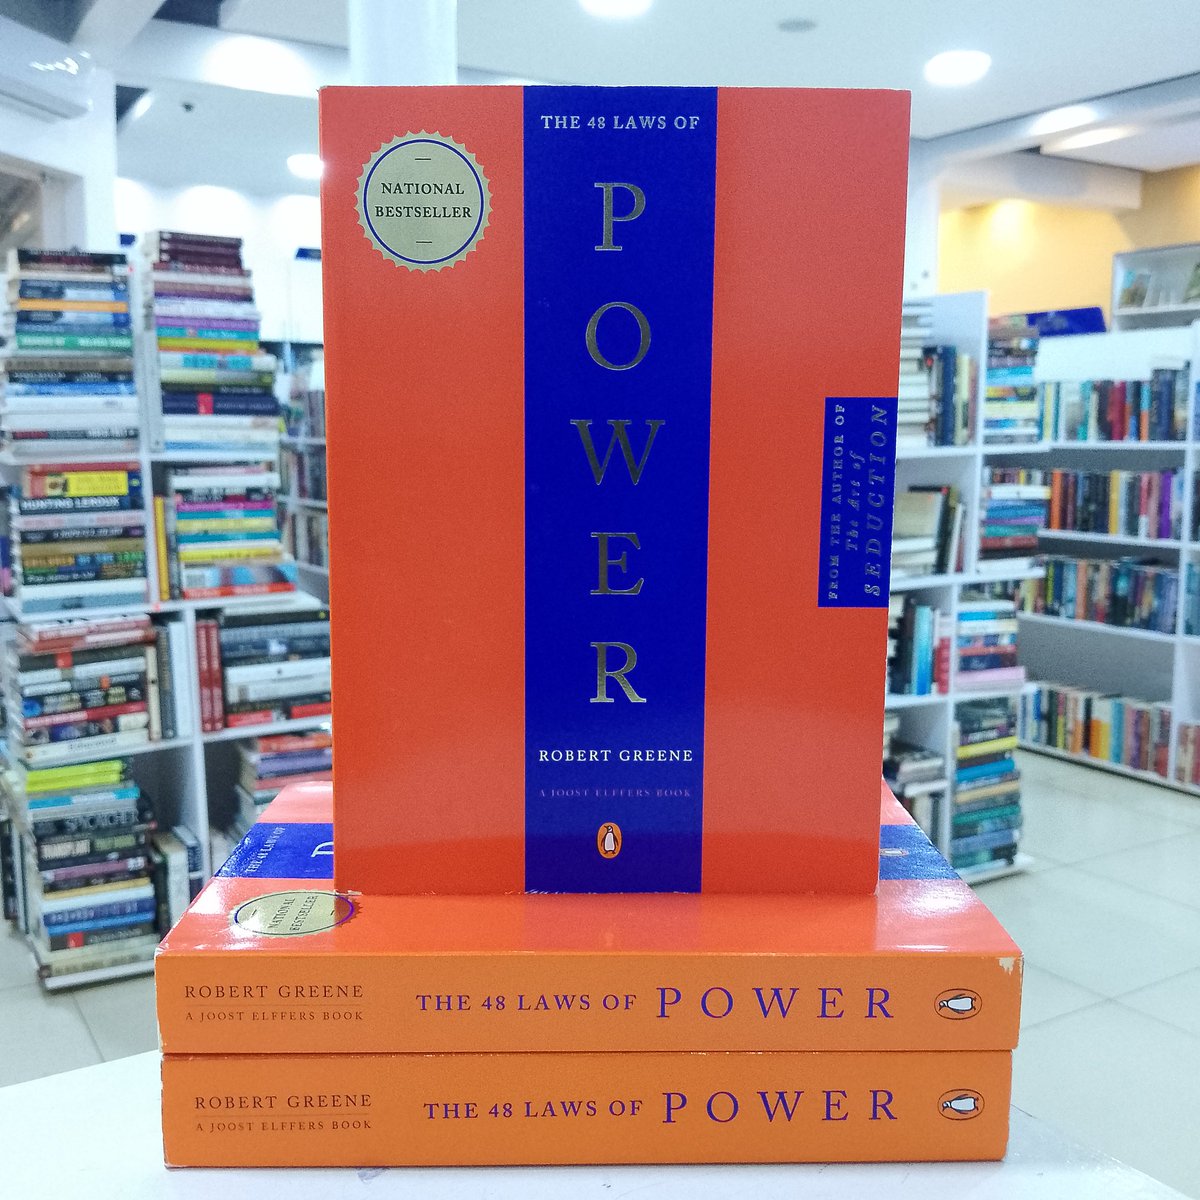 It's not enough to be a leader, or even in just any position, you need #power to cruise through it all.
@RobertGreene offers a good explanation of how all these works.
@48LawsofPowerr #bestseller 
#power
#LeadershipMatters 
#politics
#kenyanbookstore
#amustread
@halfpricedbooks